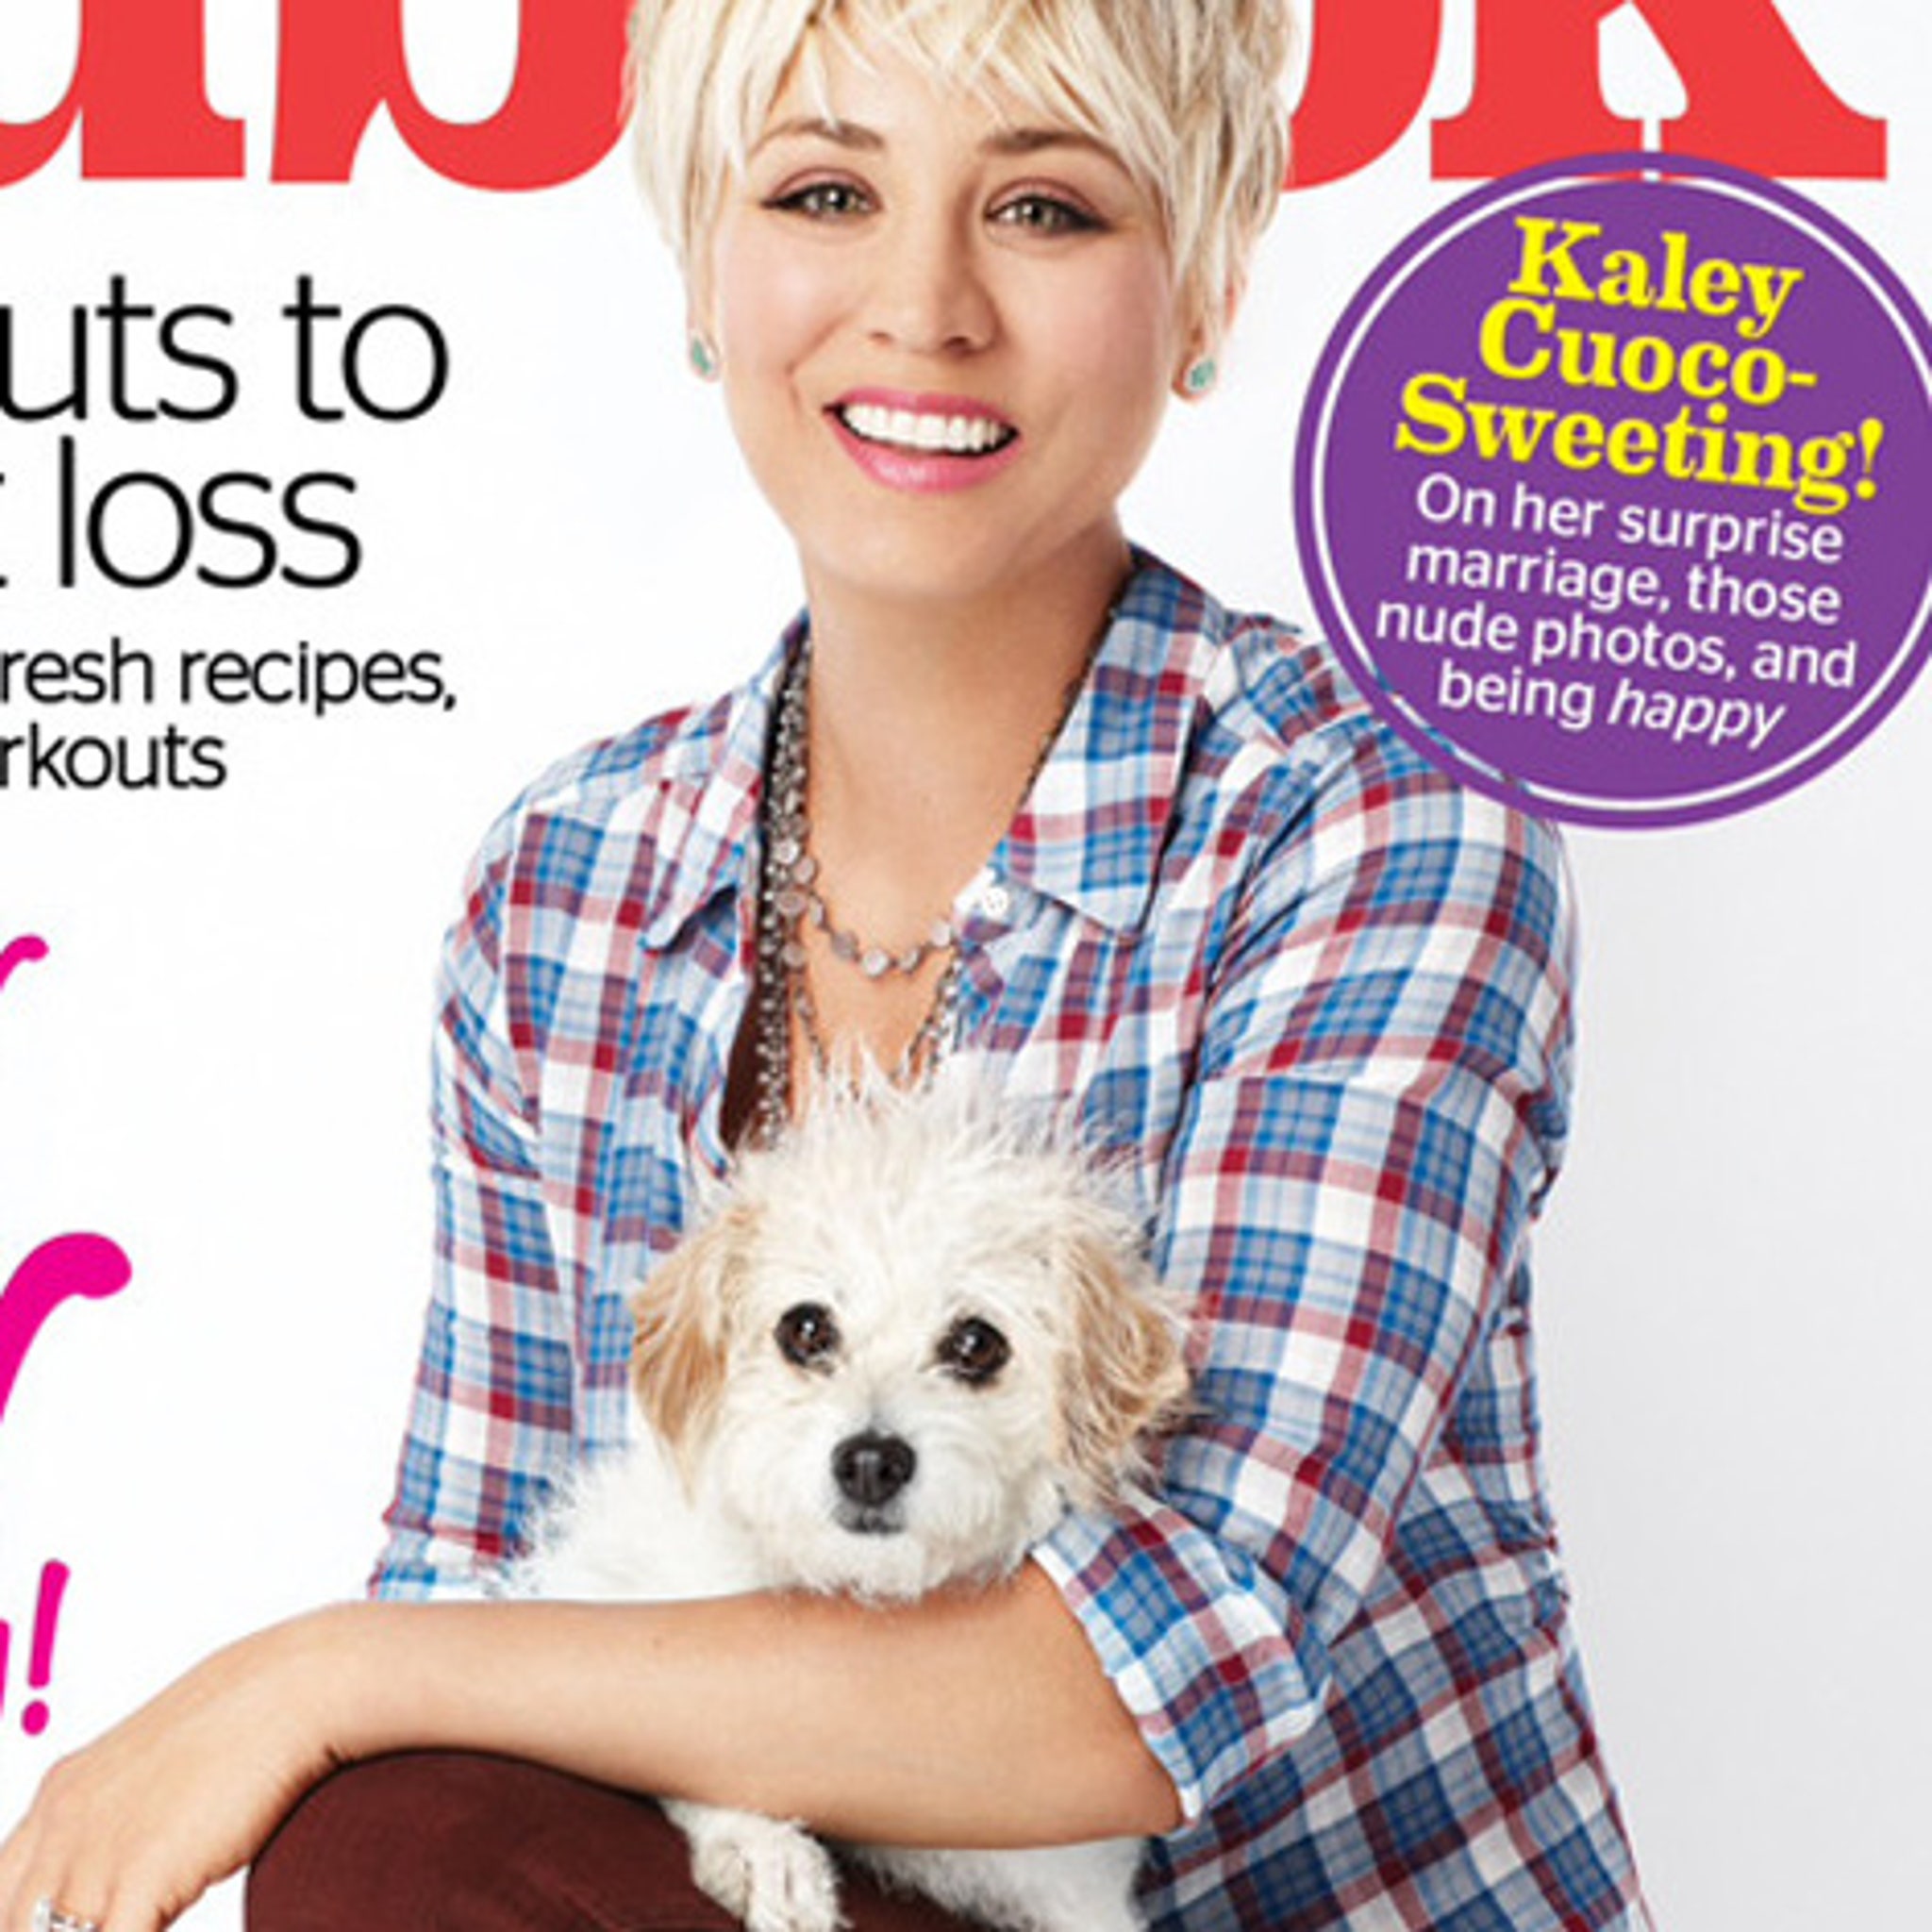 Kaley Cuoco Opens Up About Fake Boobs, Crazy Paycheck & NOT Being a Feminist